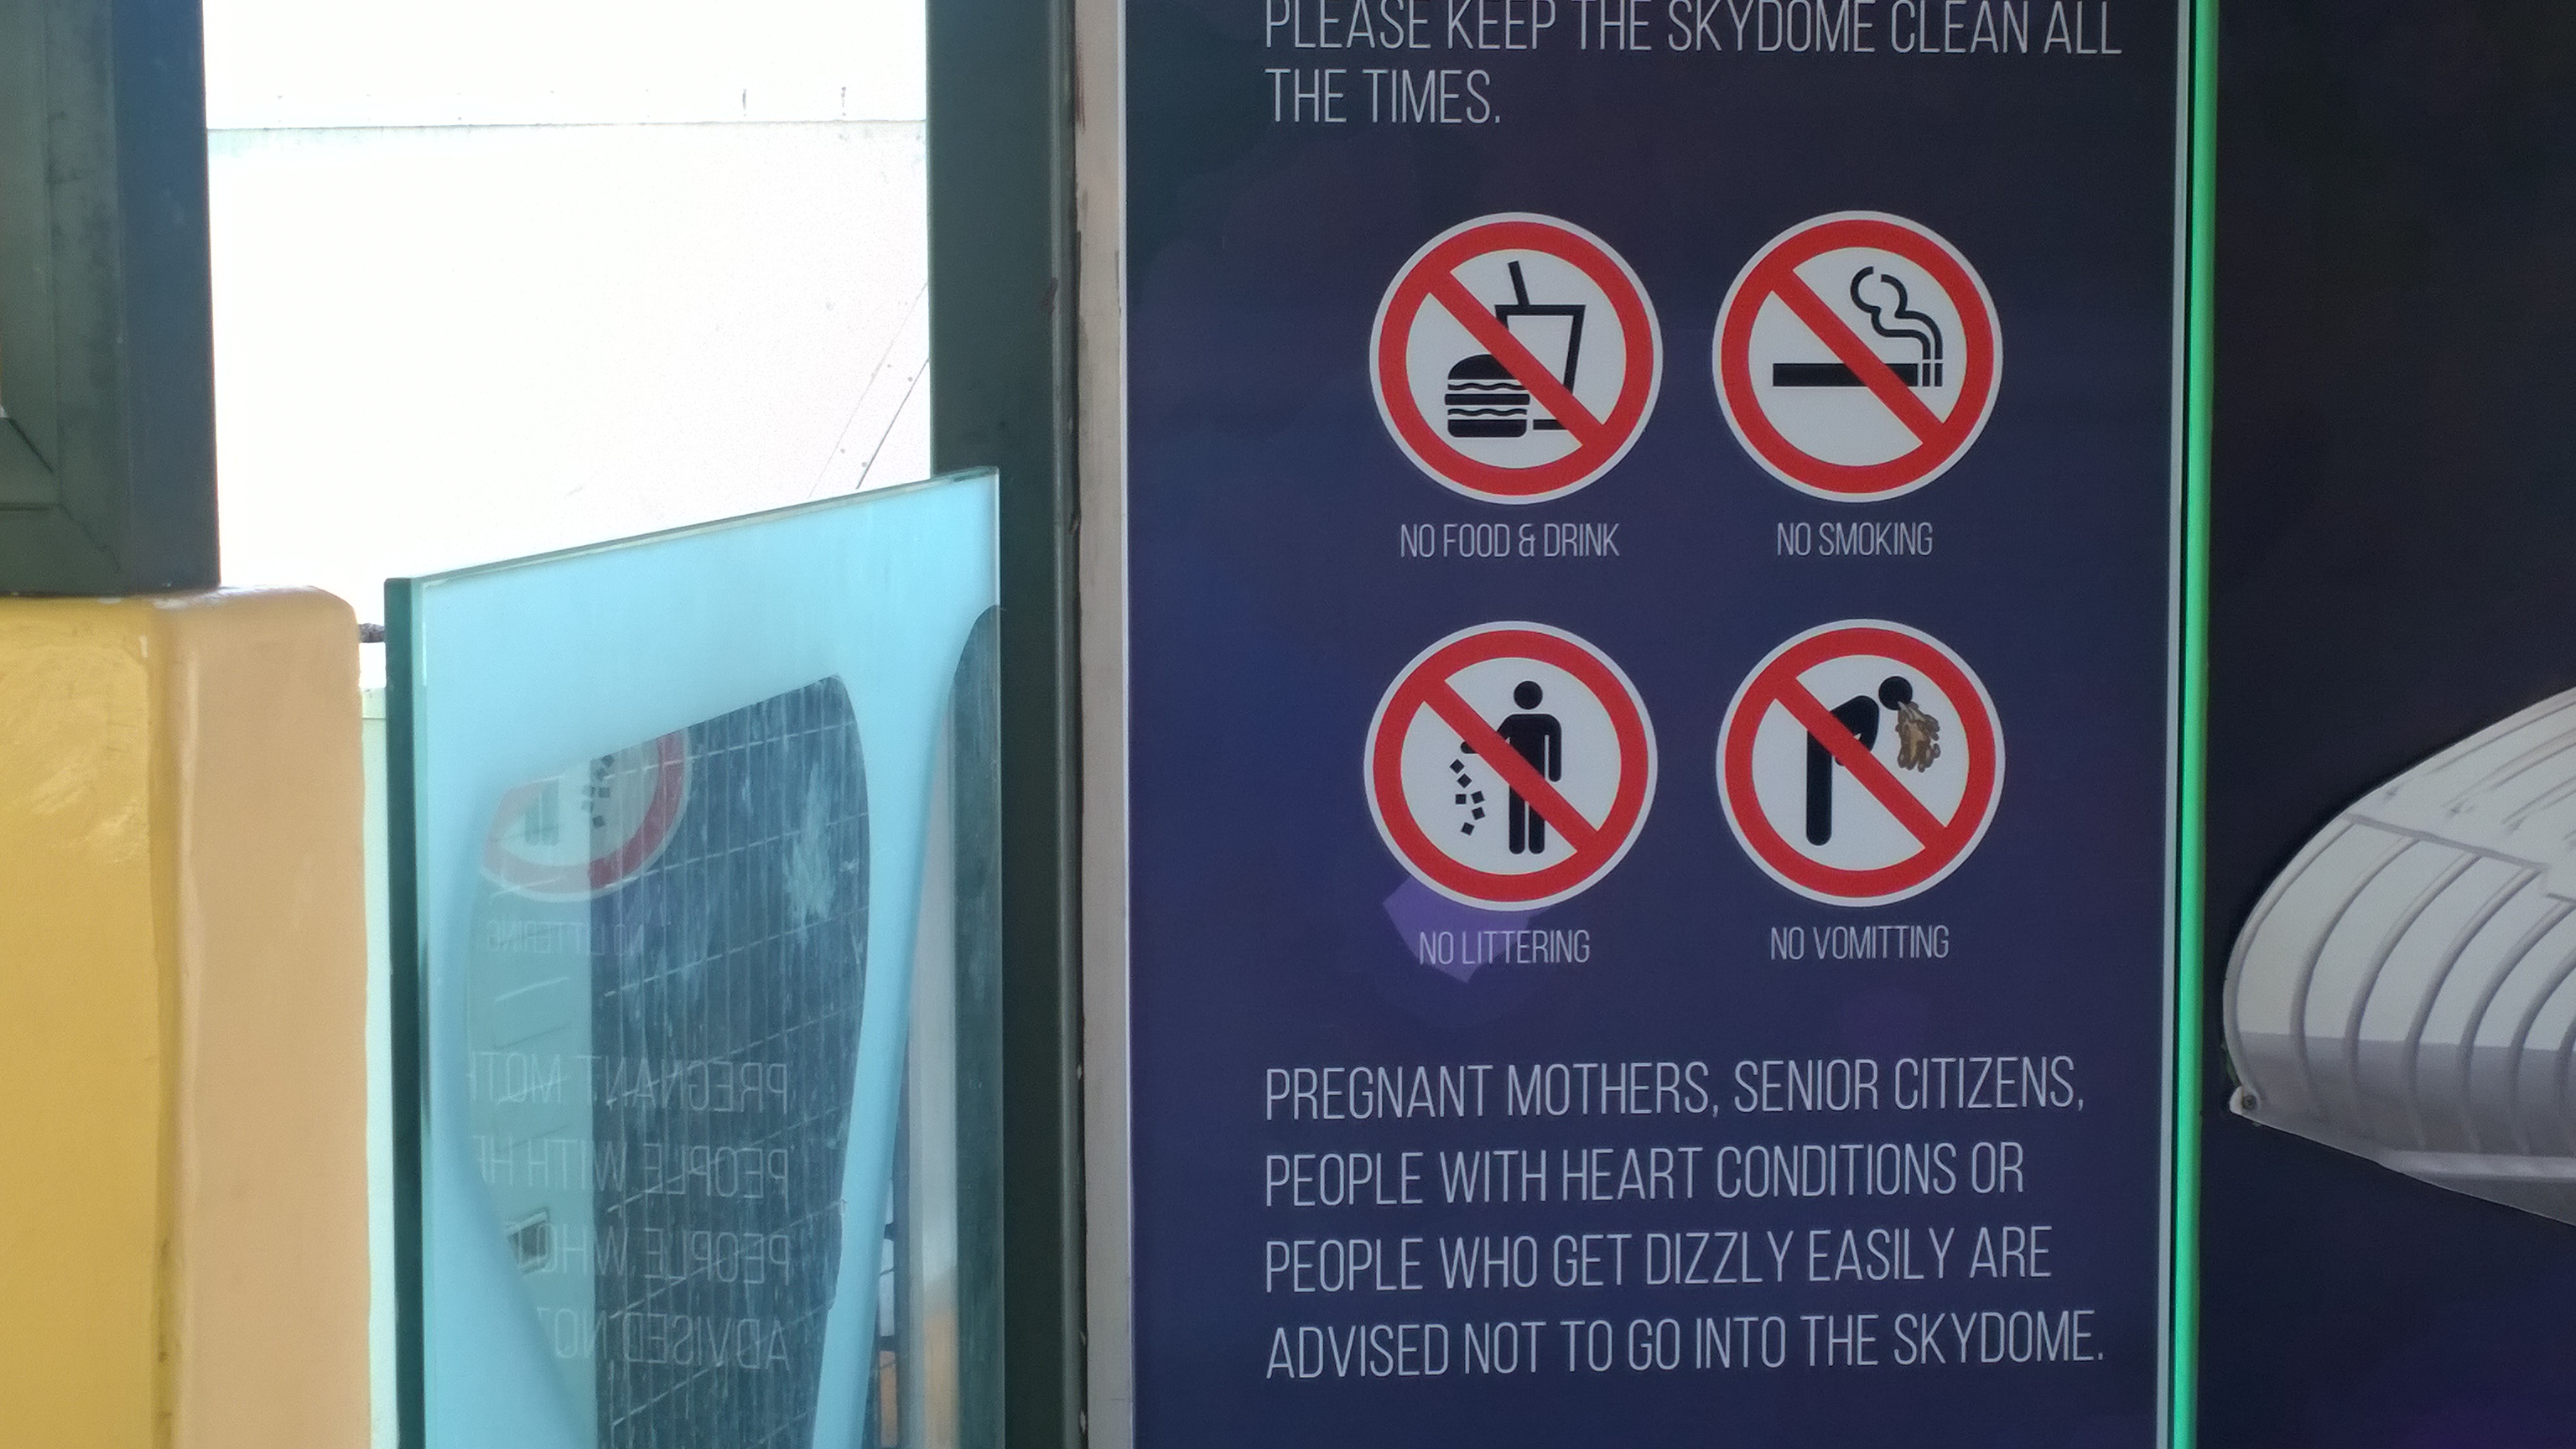 Sign at the Skydome in Langkawi, Malaysia that says No vomiting